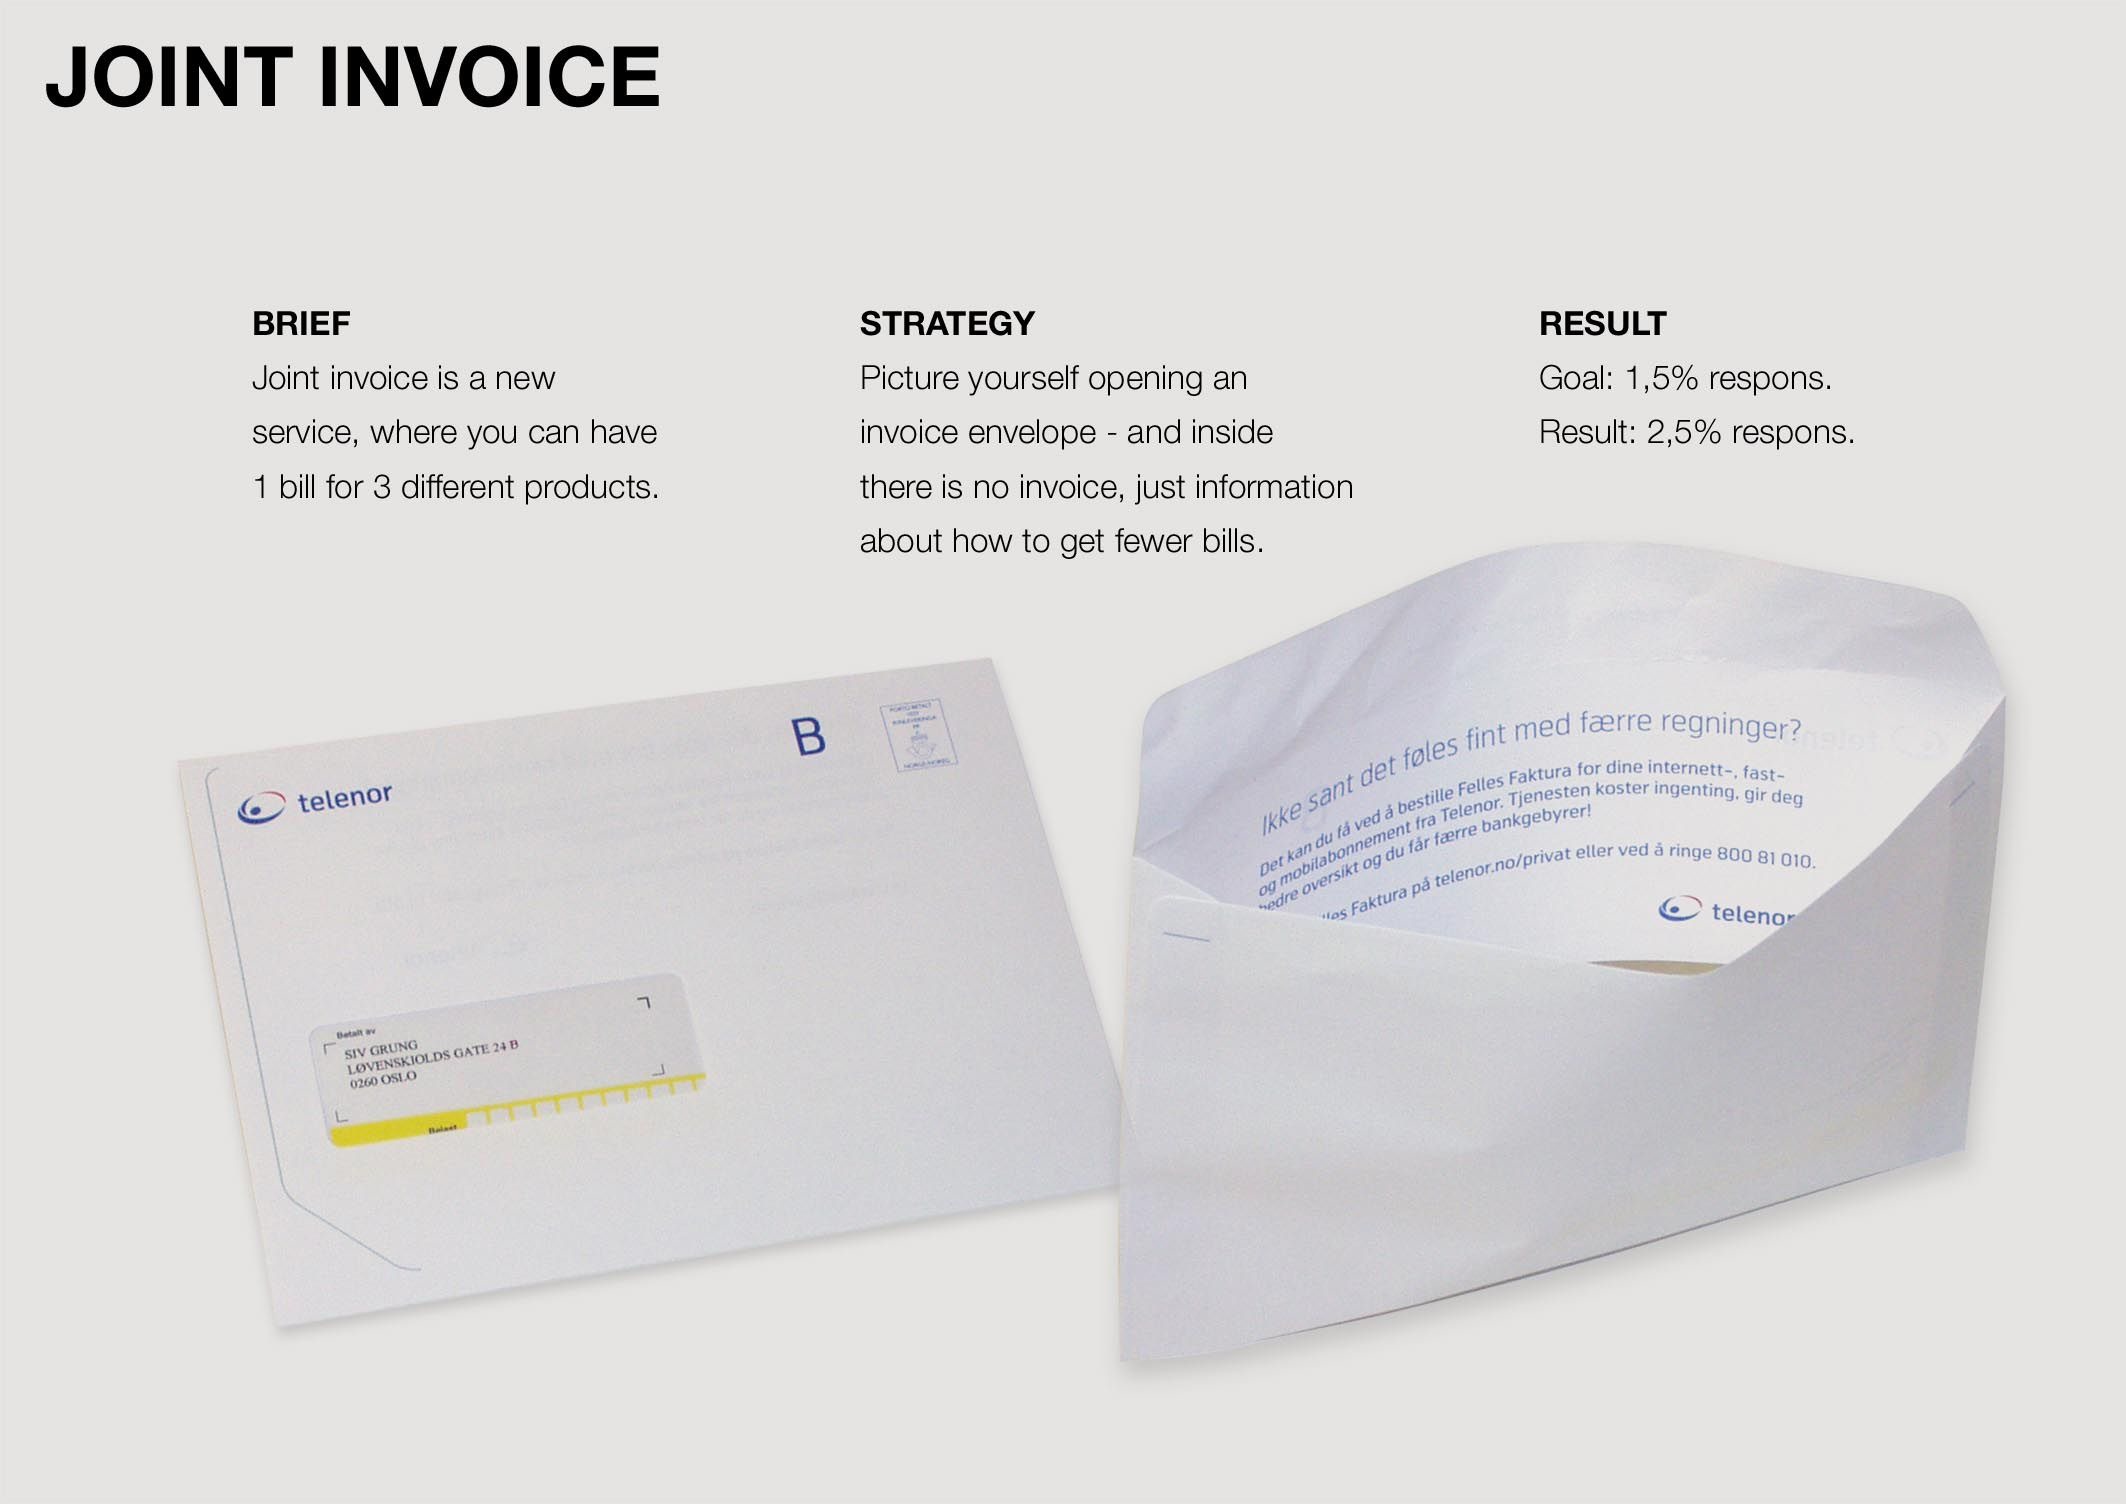 JOINT INVOICING